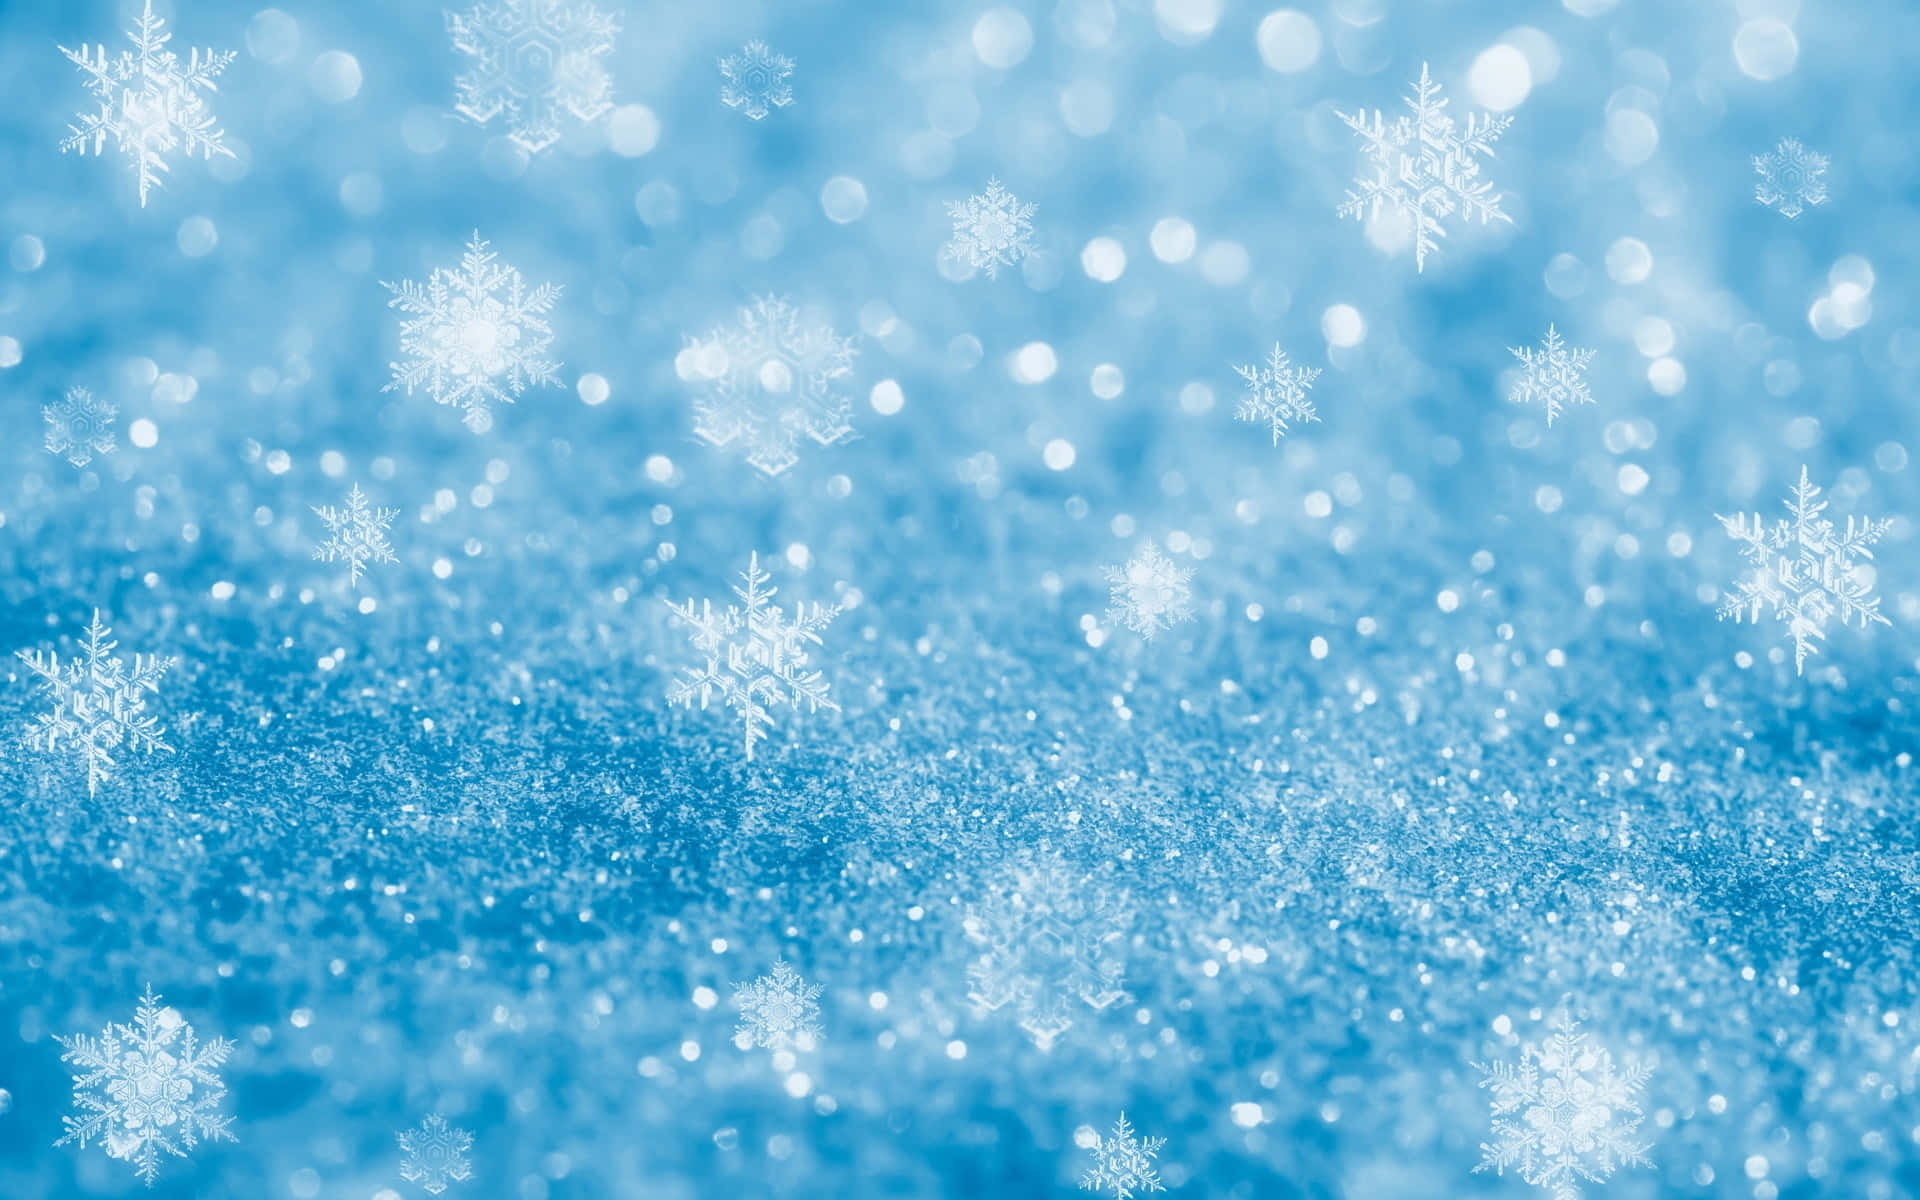 Sparkly Blue Background&Snowflake